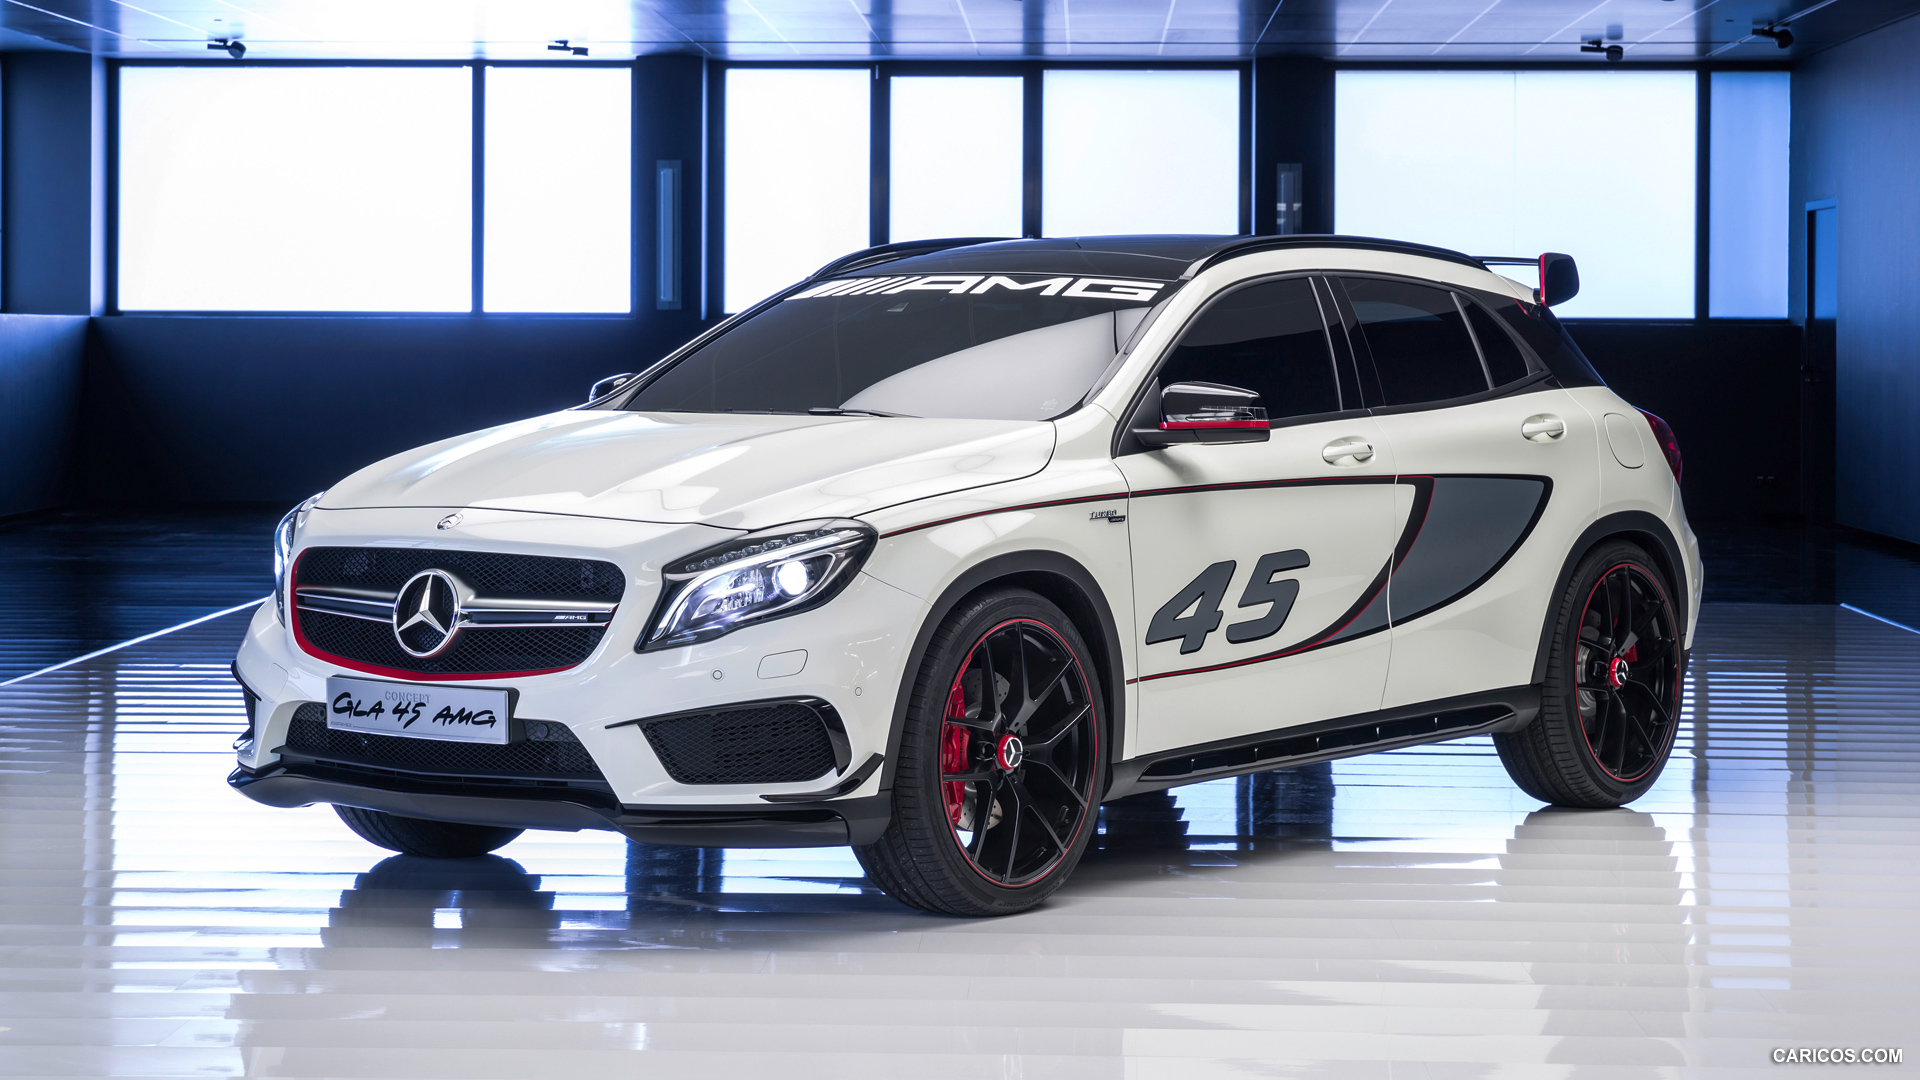 Mercedes-Benz GLA 45 AMG Concept (2013)  - Front, #14 of 15